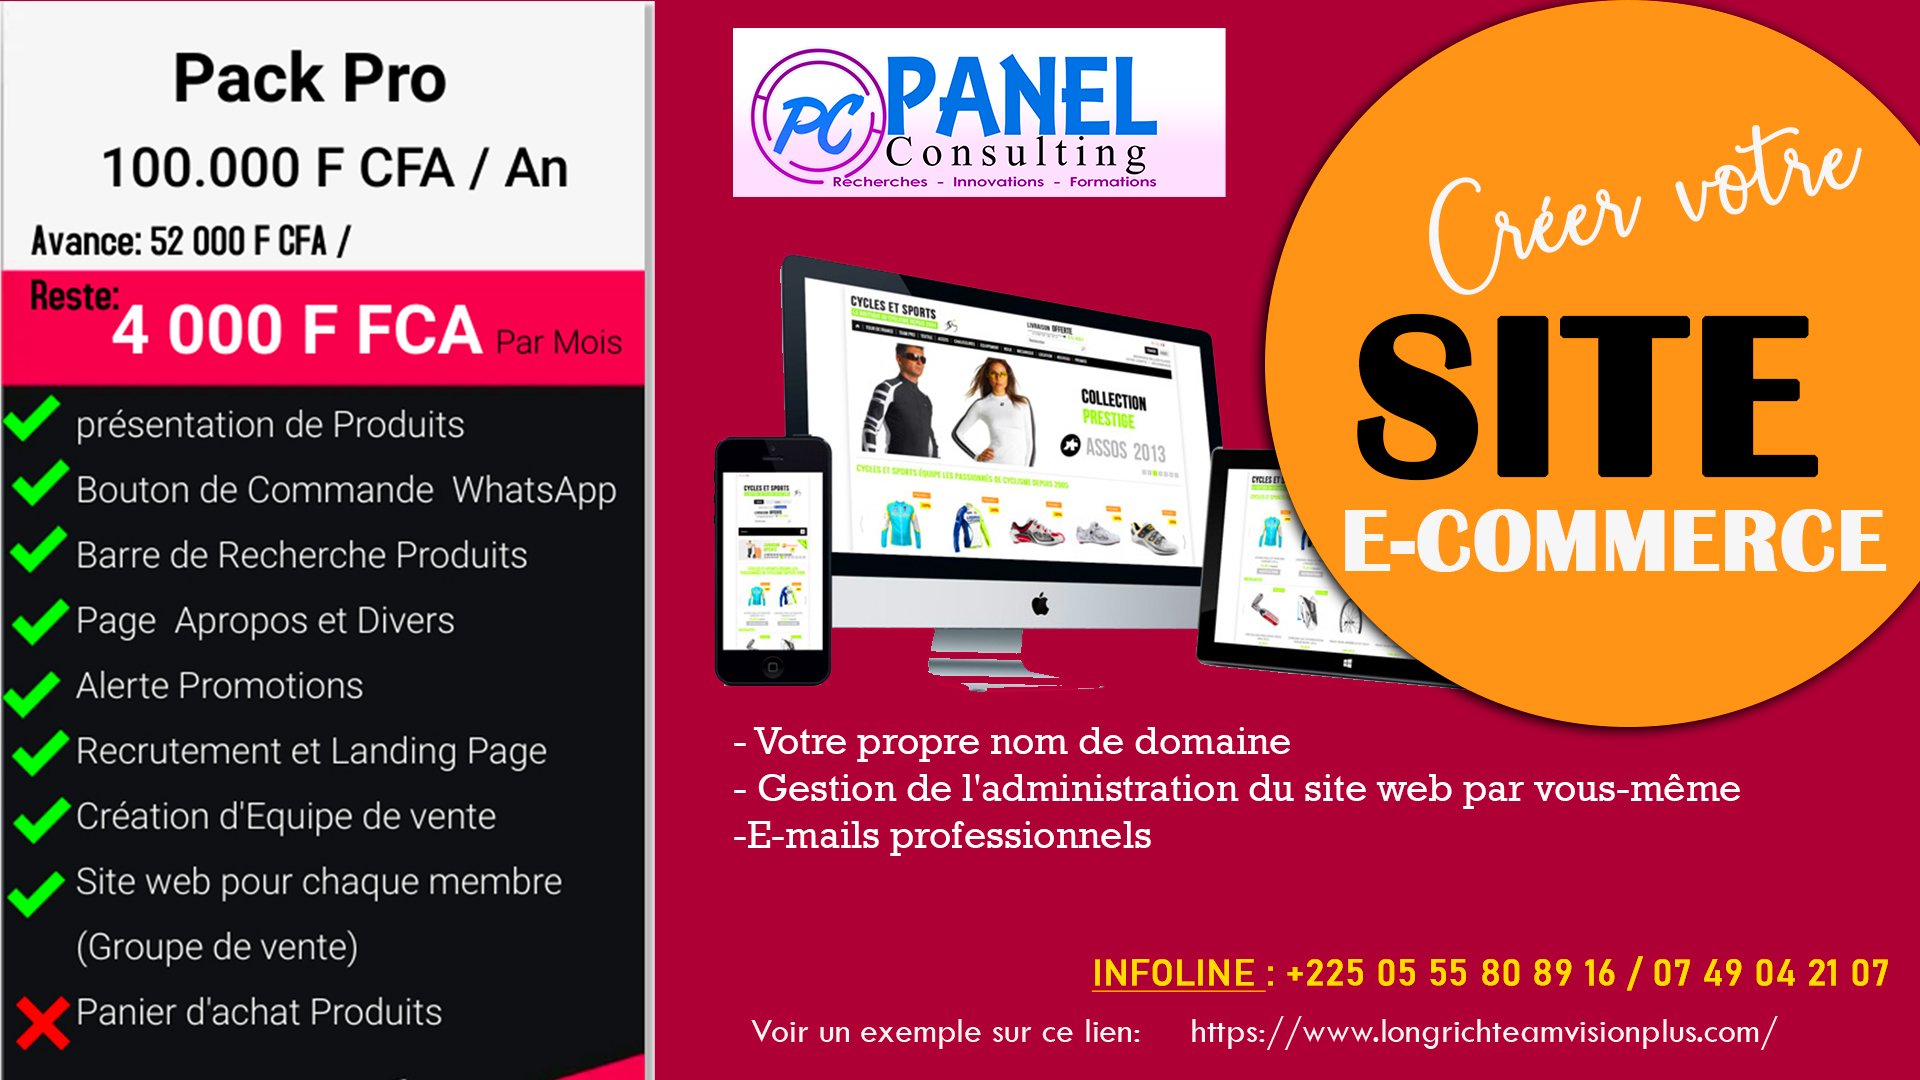 ceration-boutique-en-ligne-pack PRO-panel-consulting.jpg-panel-consulting